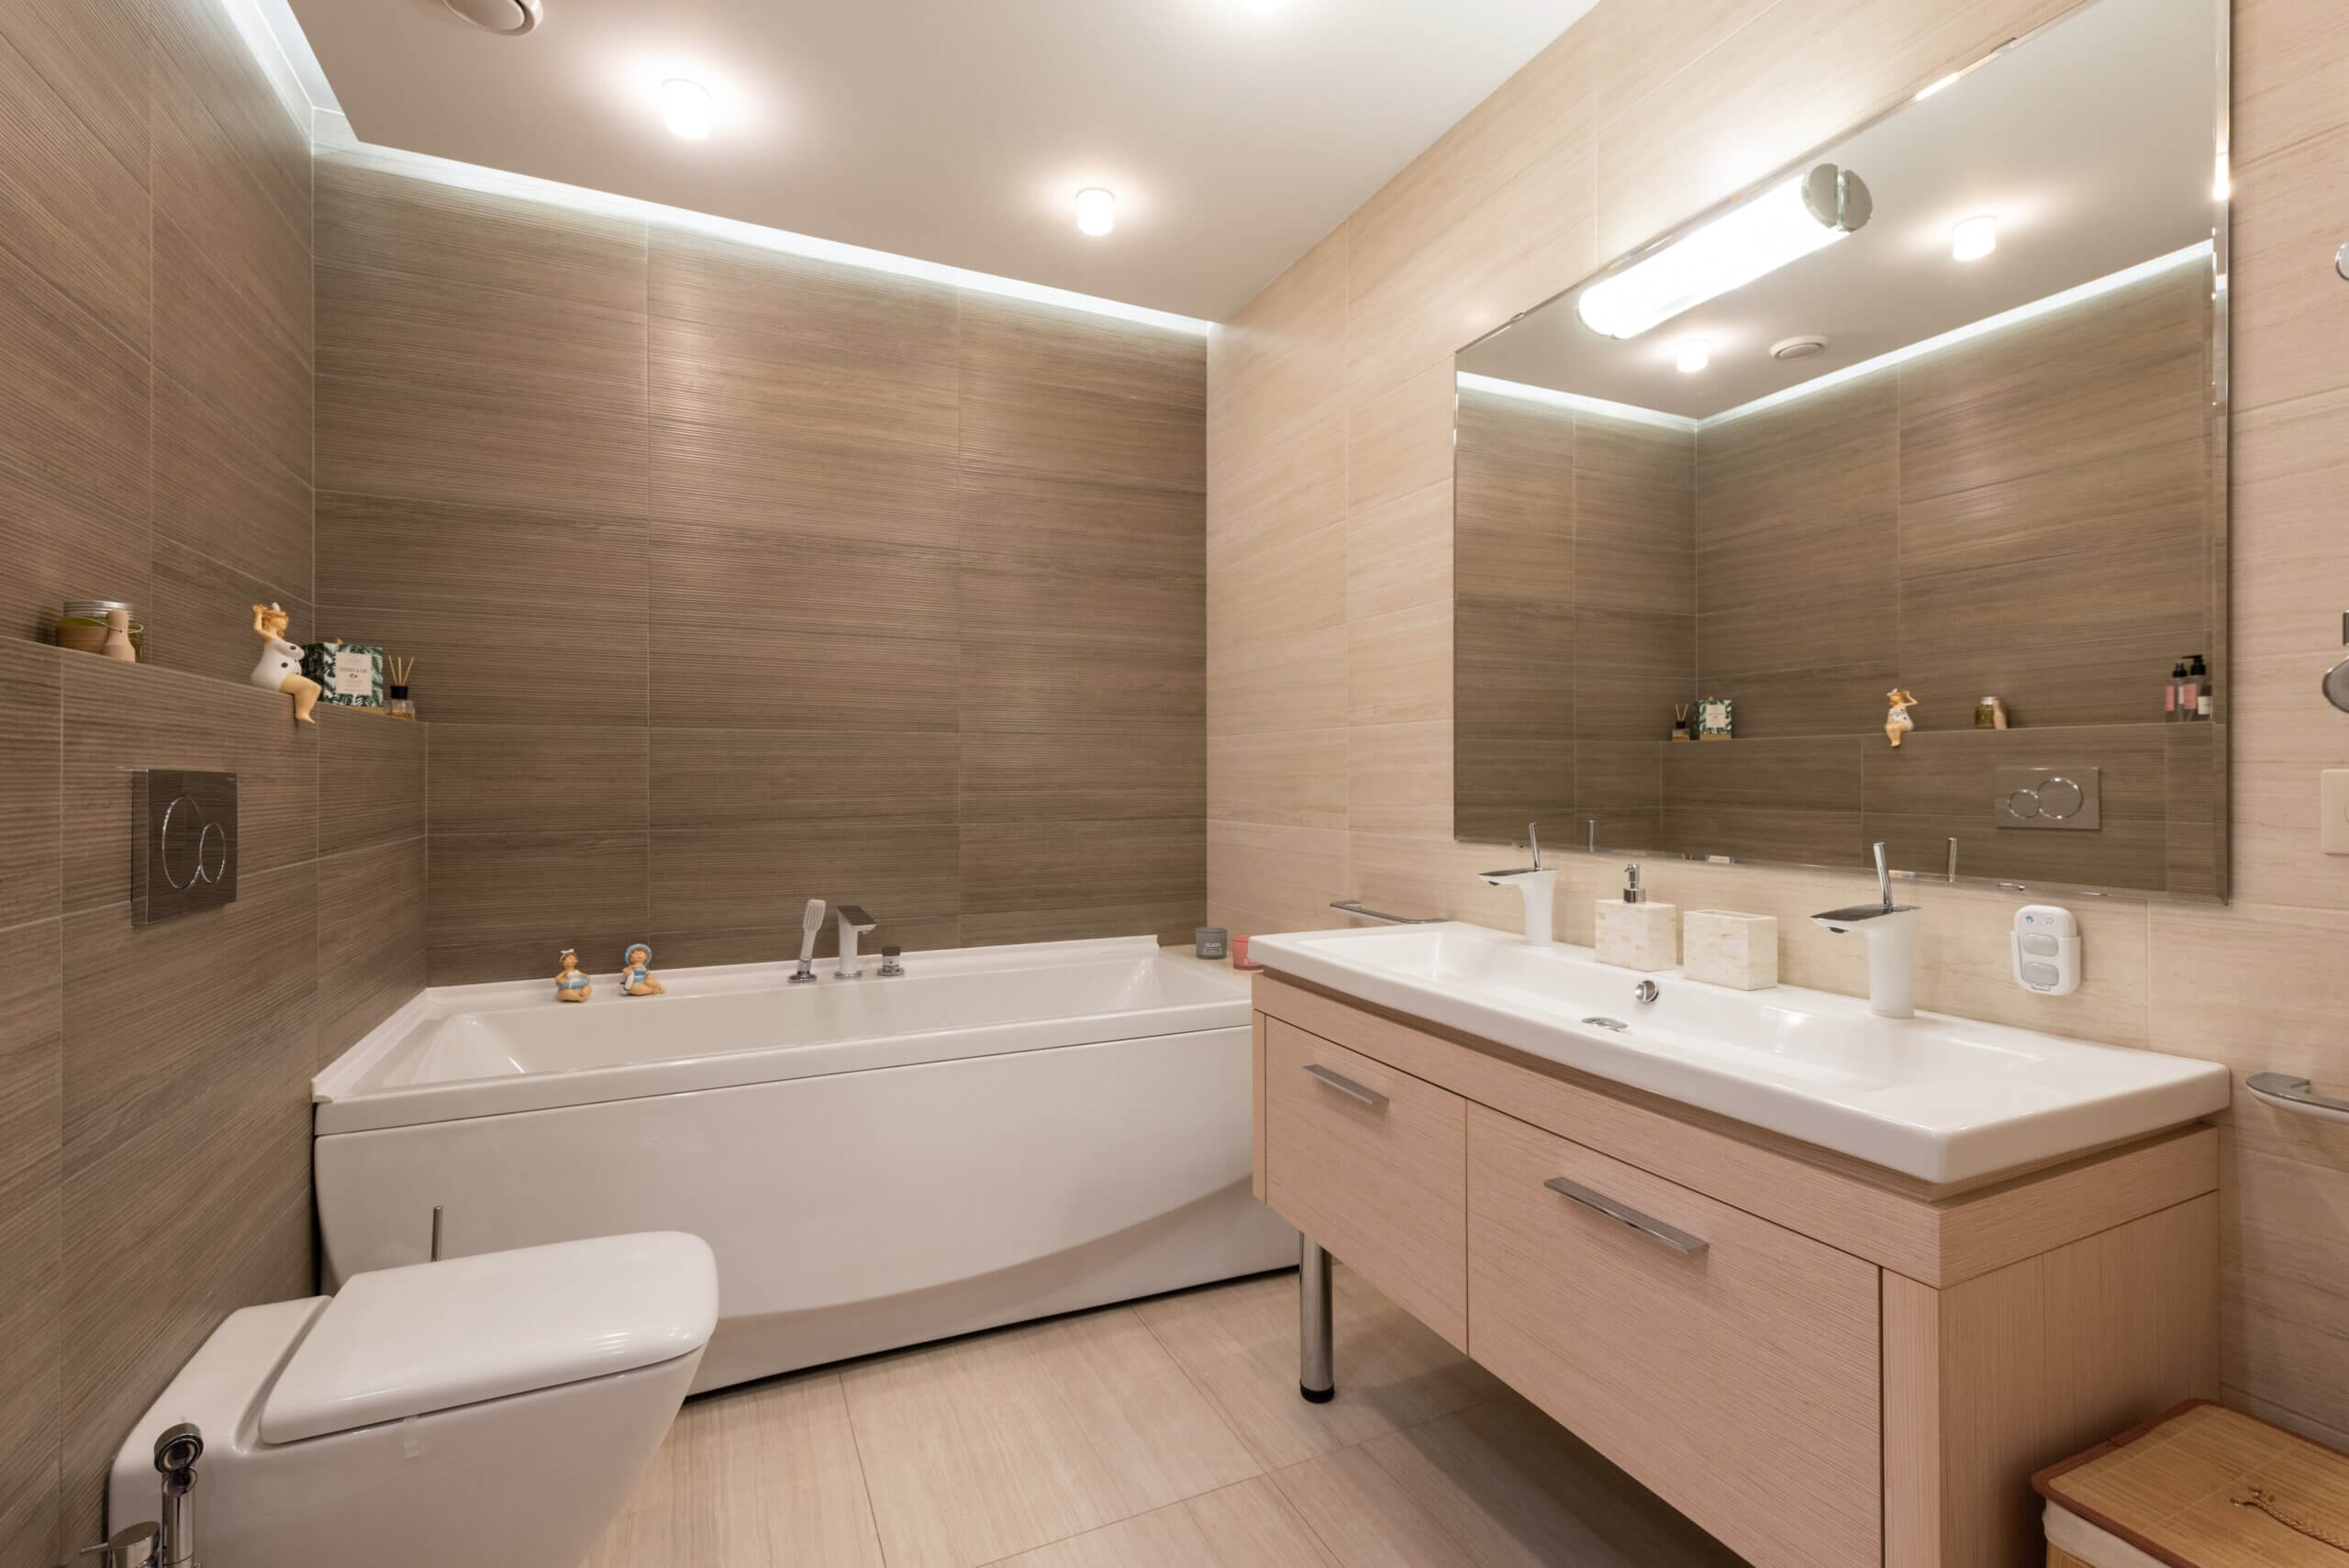 Bathroom lights in a neutral-colored bathroom with mirror